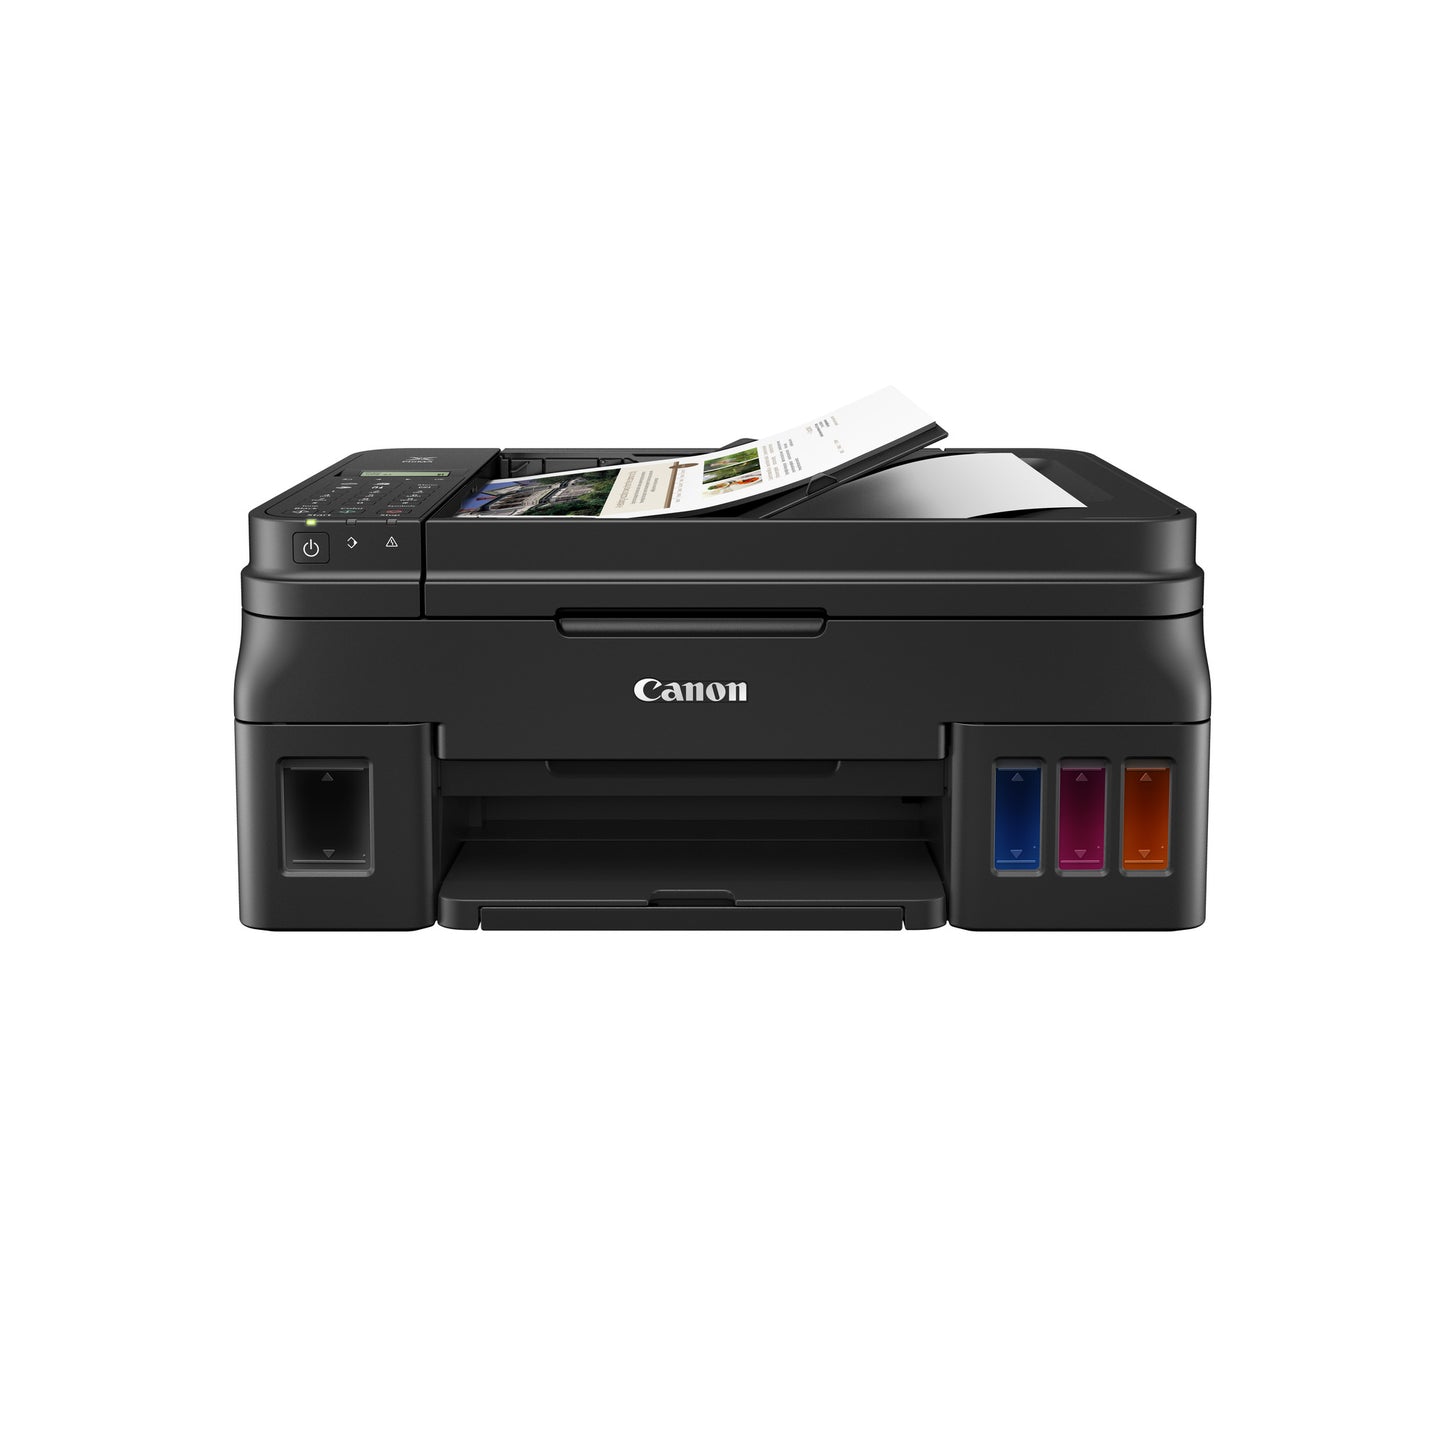 Canon PIXMA G3020 3-in-1 Inkjet Refillable Ink Tank Printer with Print, Scan and Copy Function, 4800DPI Printing Resolution, 100 Max Sheets, 9ipm Print Speed,  USB PC Interface and Wireless Printing for Home and Office Use